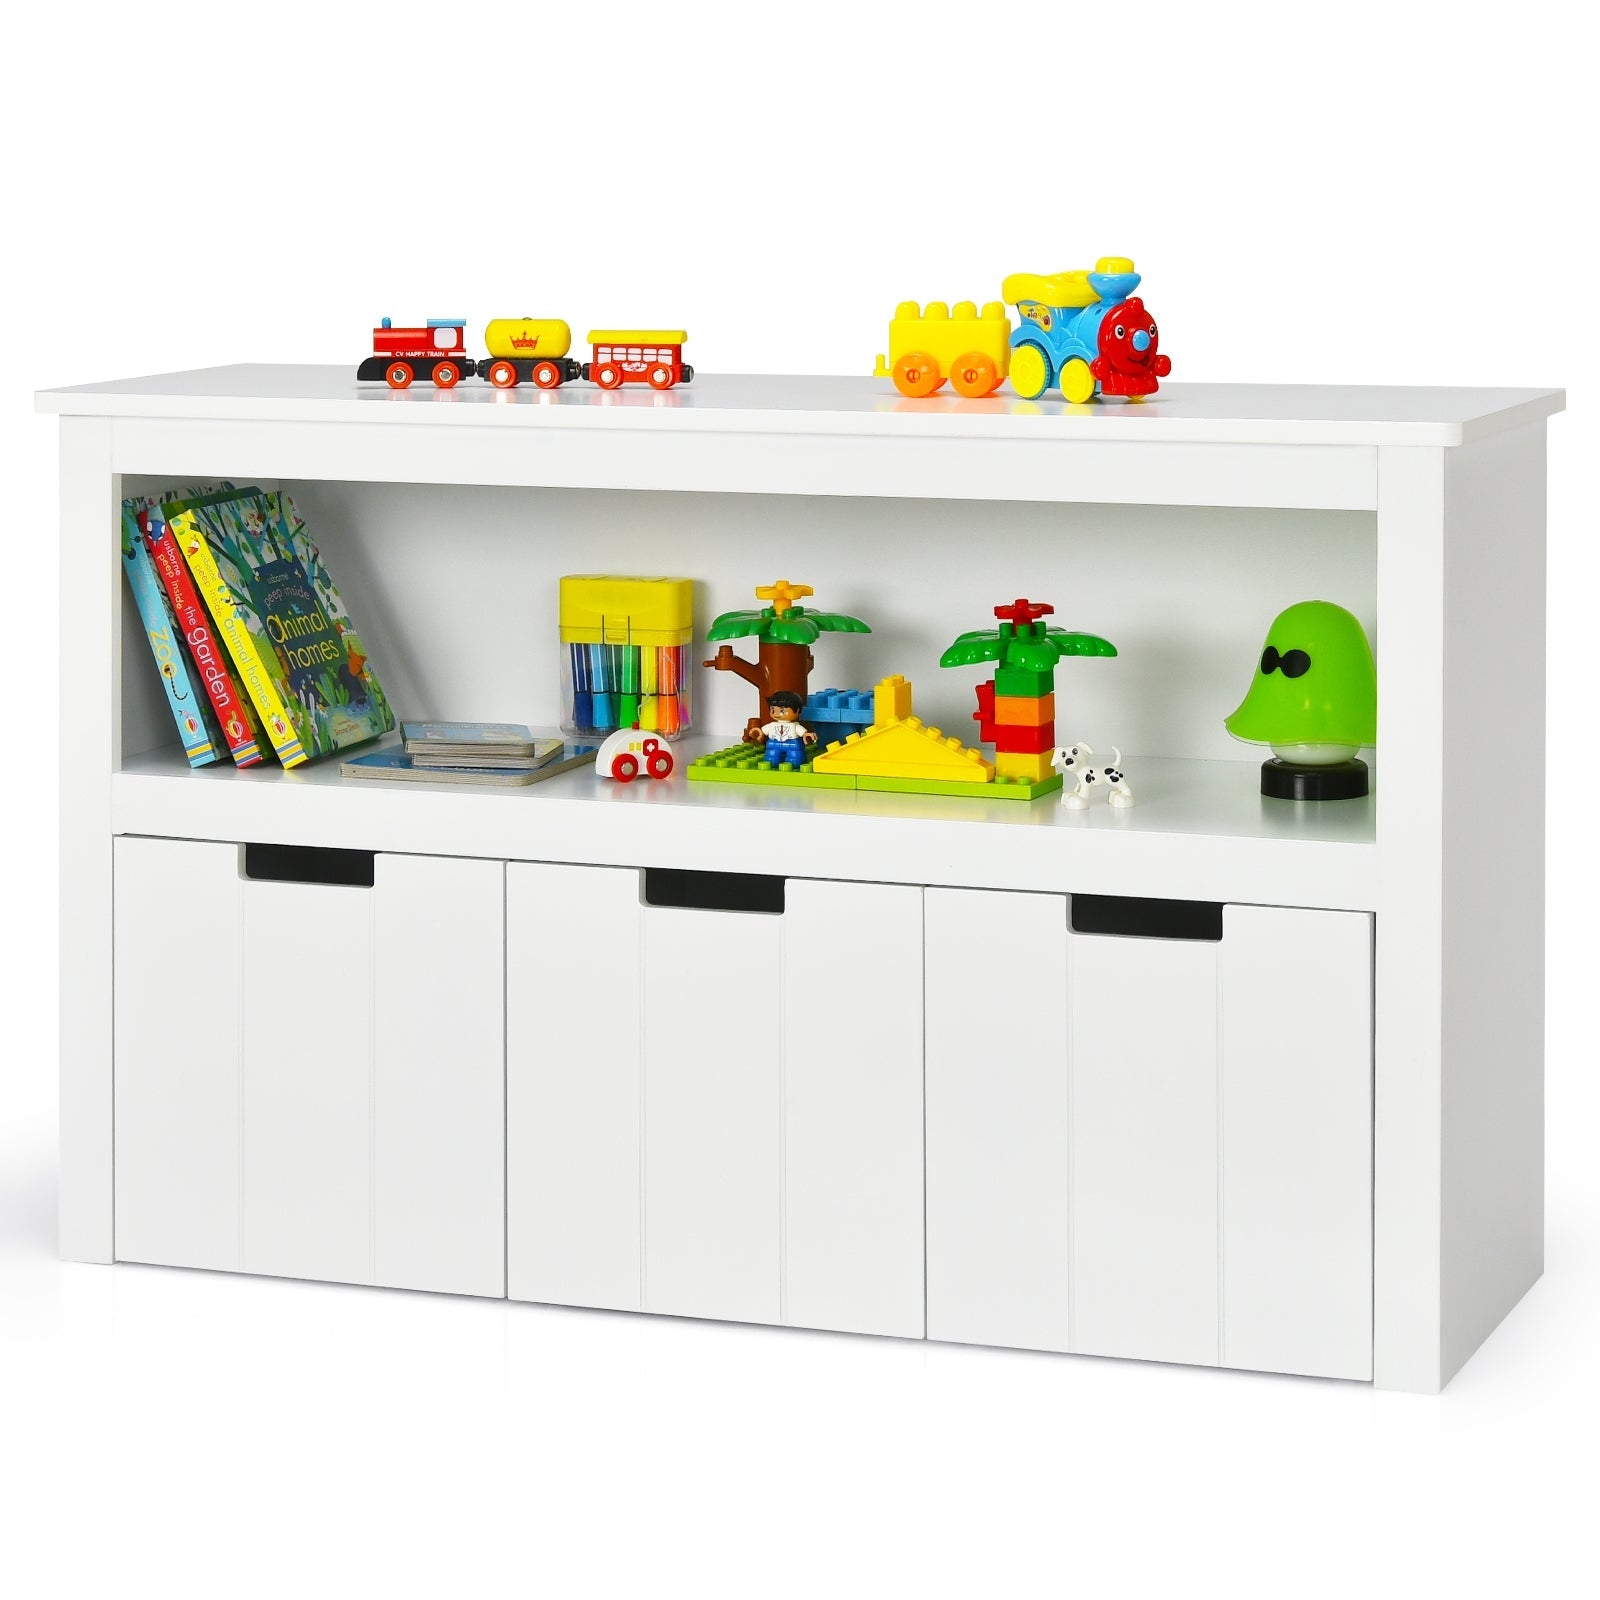 Slide-Out Drawers Kids Toy Storage Cabinet for Bedroom